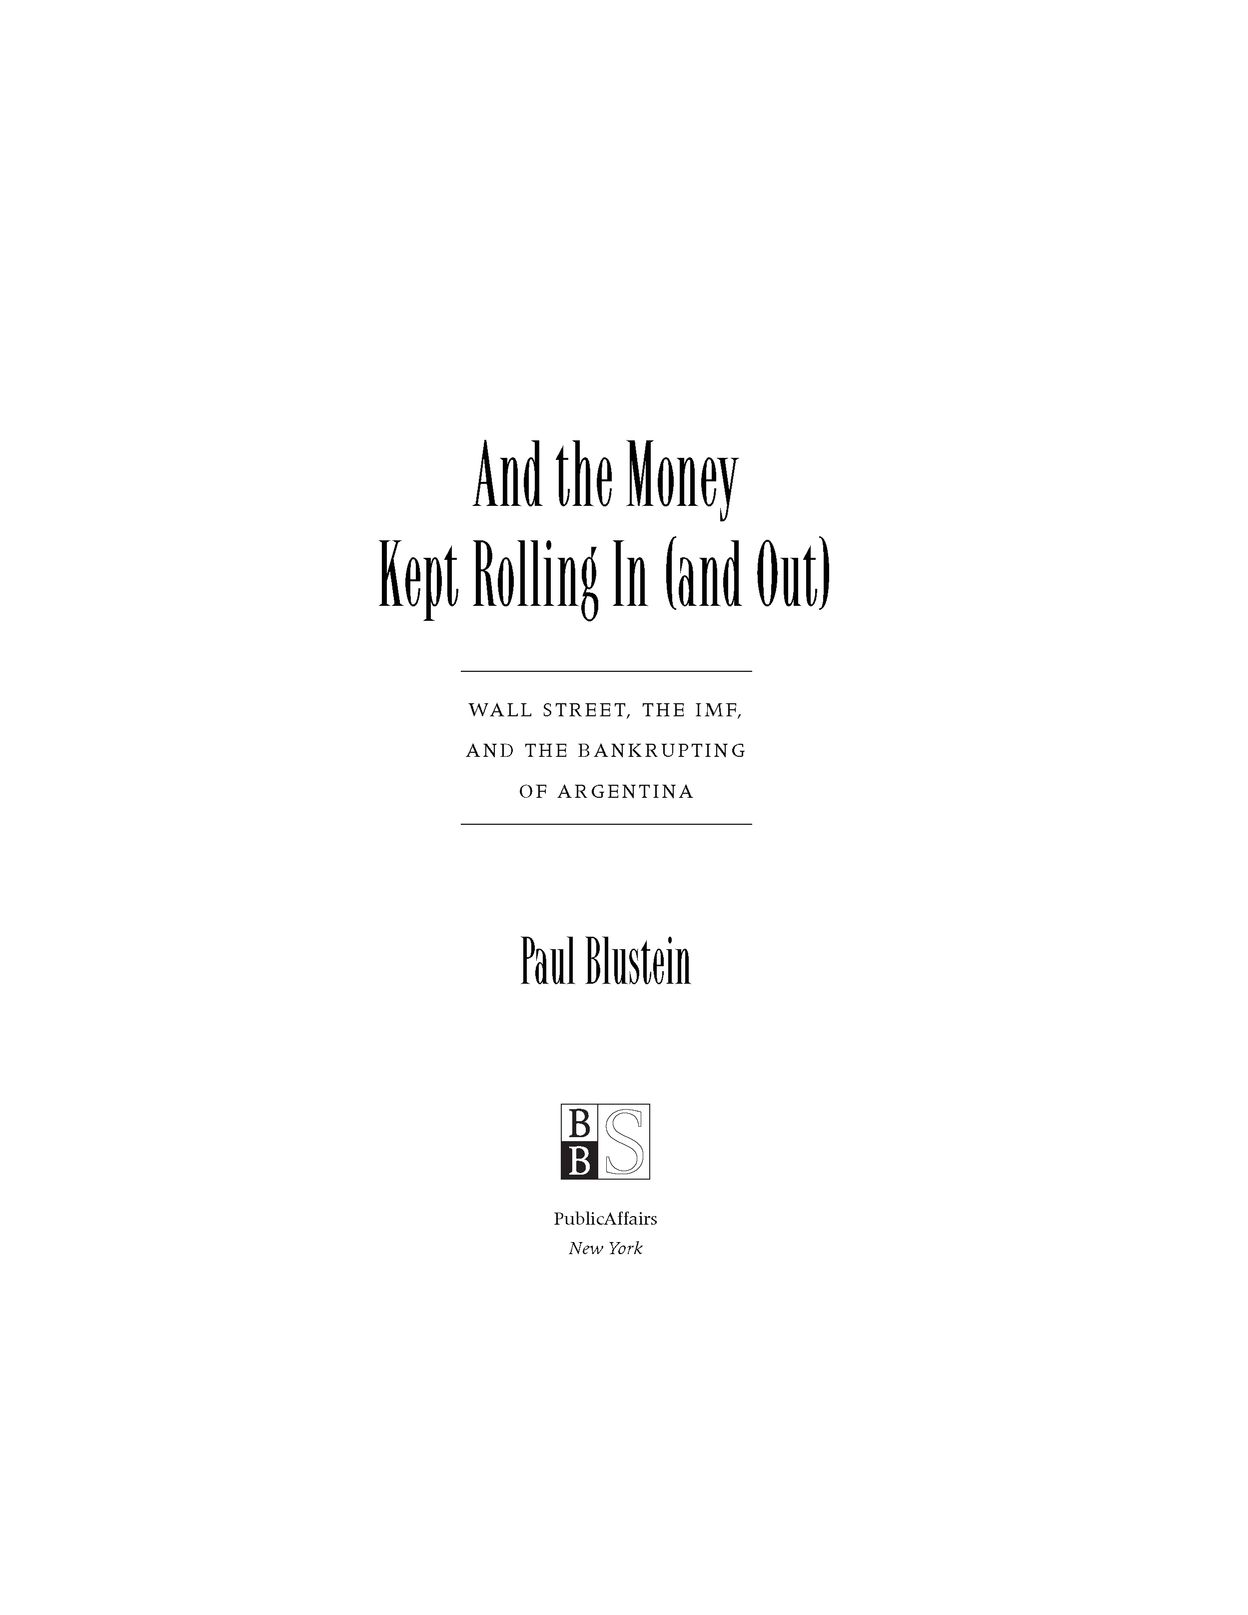 Table of Contents PRAISE FOR AND THE MONEY KEPT ROLLING IN AND OUT A - photo 2